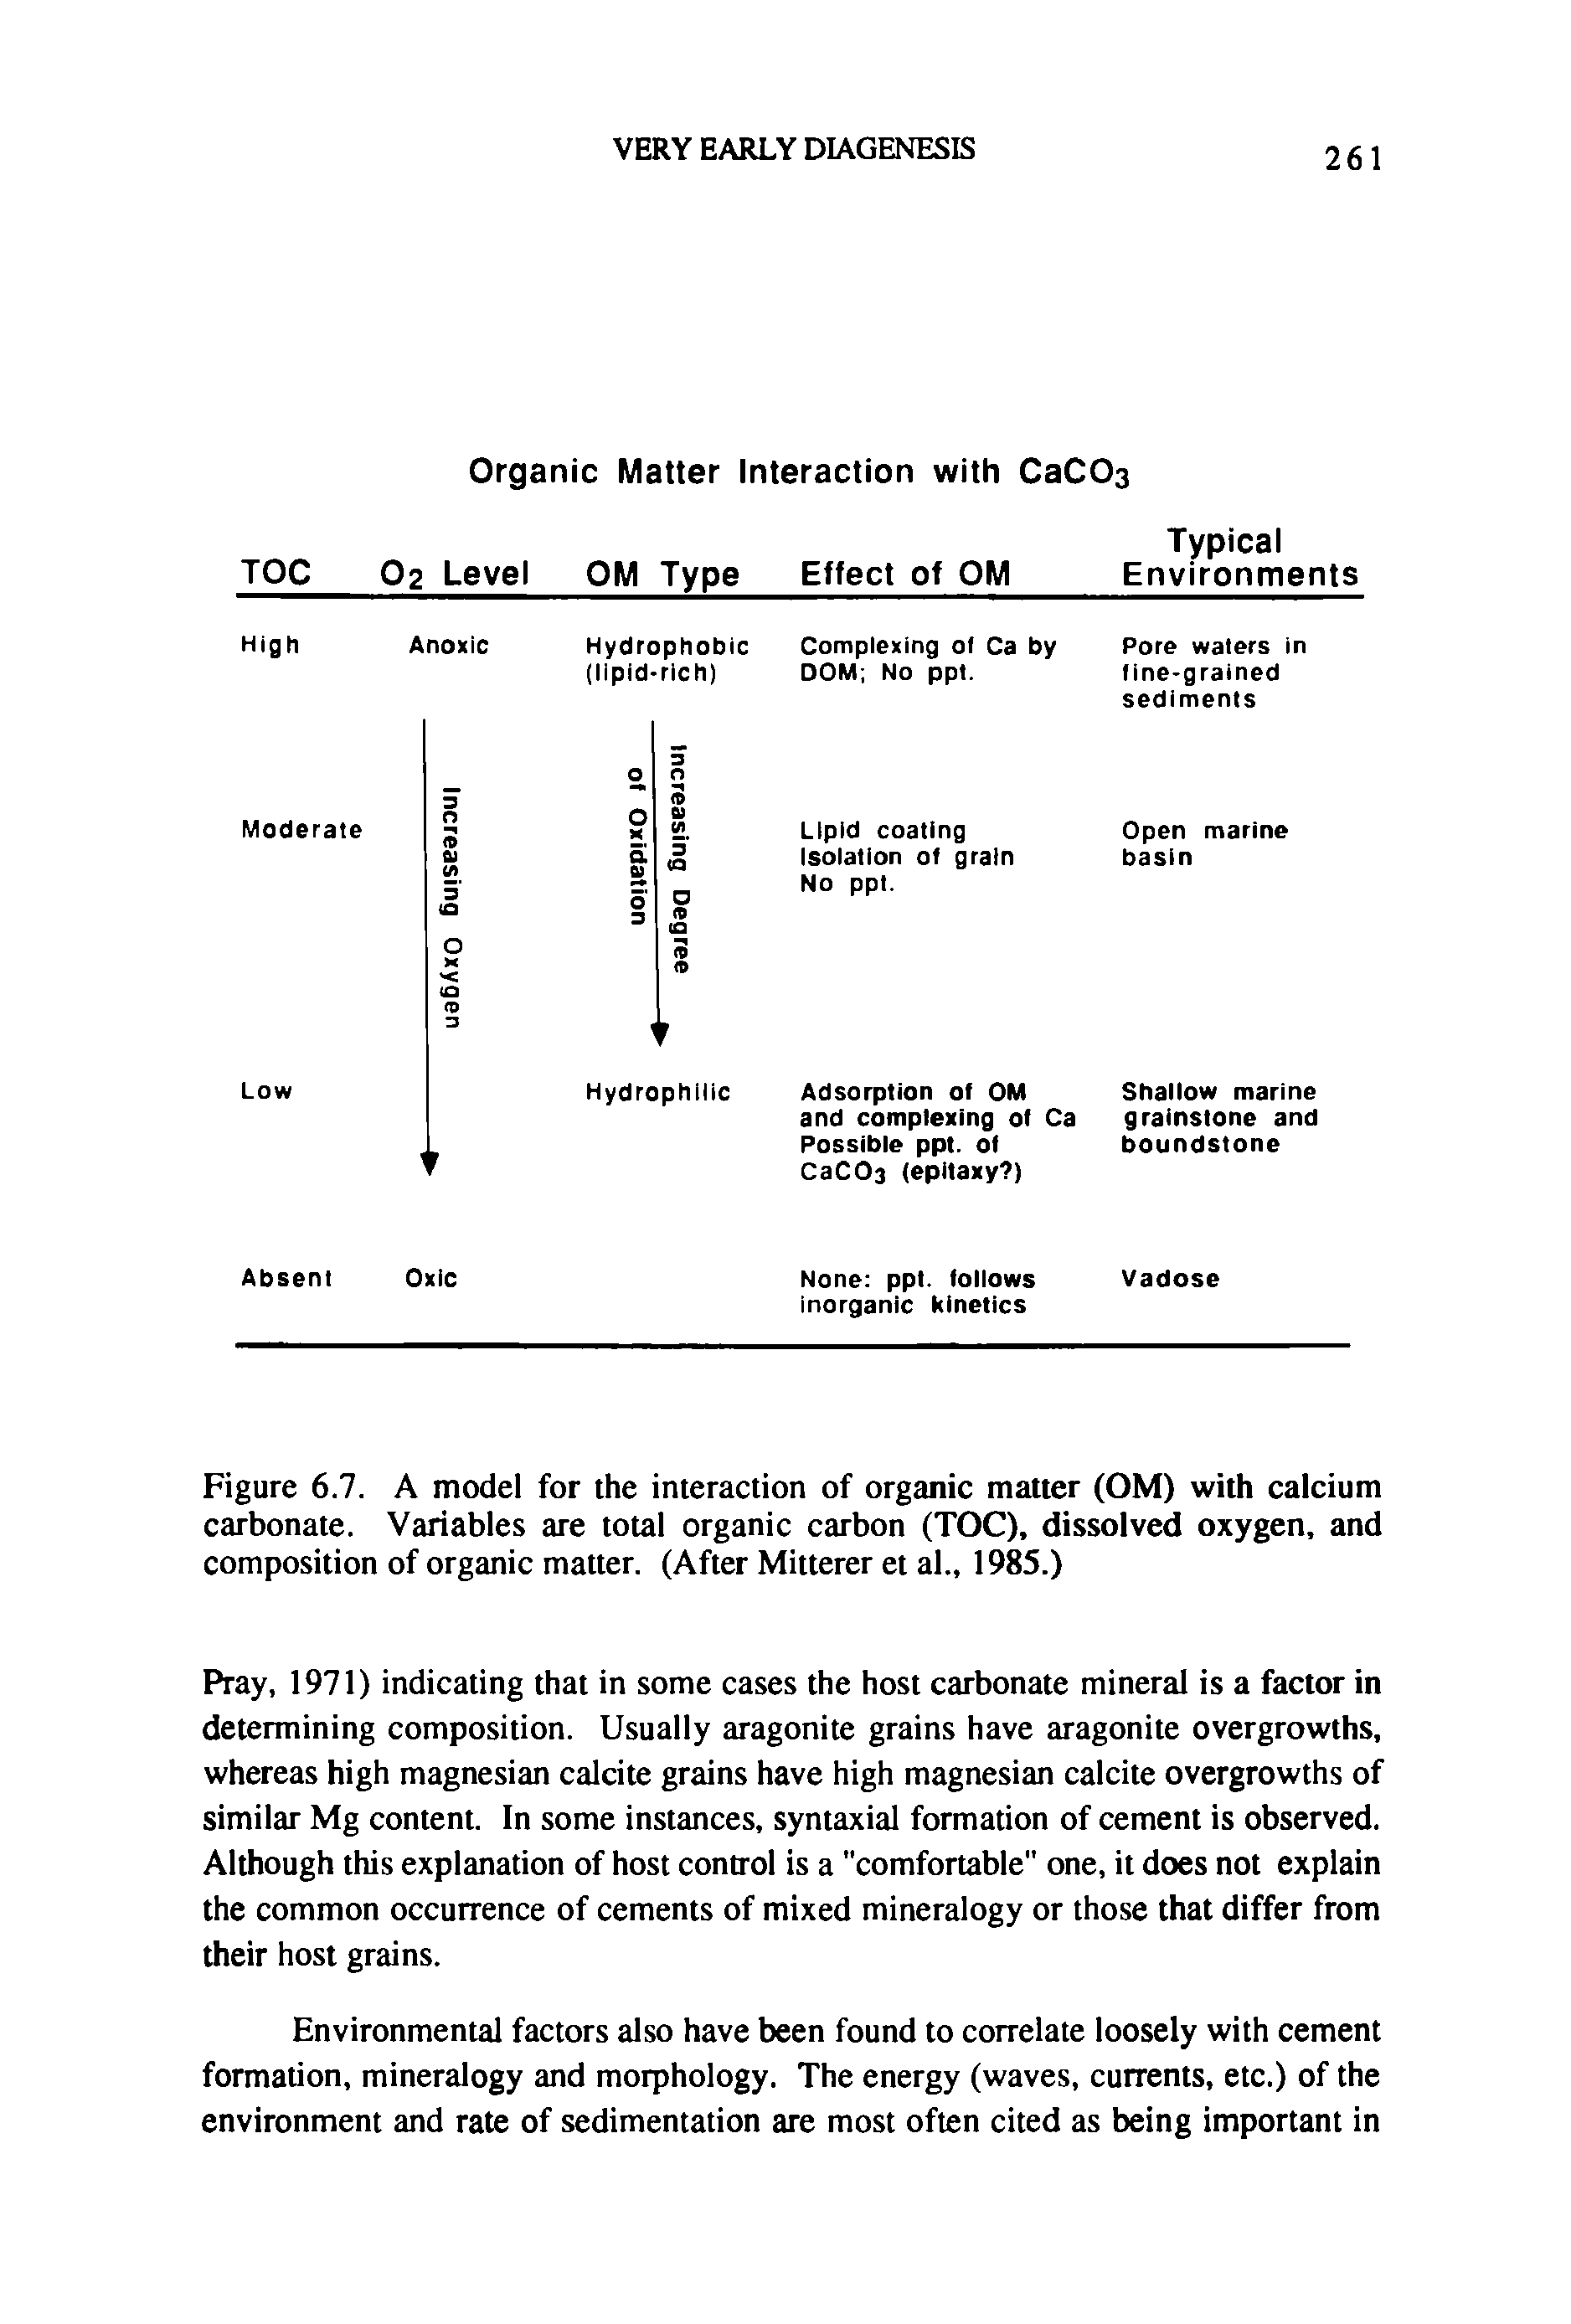 Figure 6.7. A model for the interaction of organic matter (OM) with calcium carbonate. Variables are total organic carbon (TOC), dissolved oxygen, and composition of organic matter. (After Mitterer et al 1985.)...